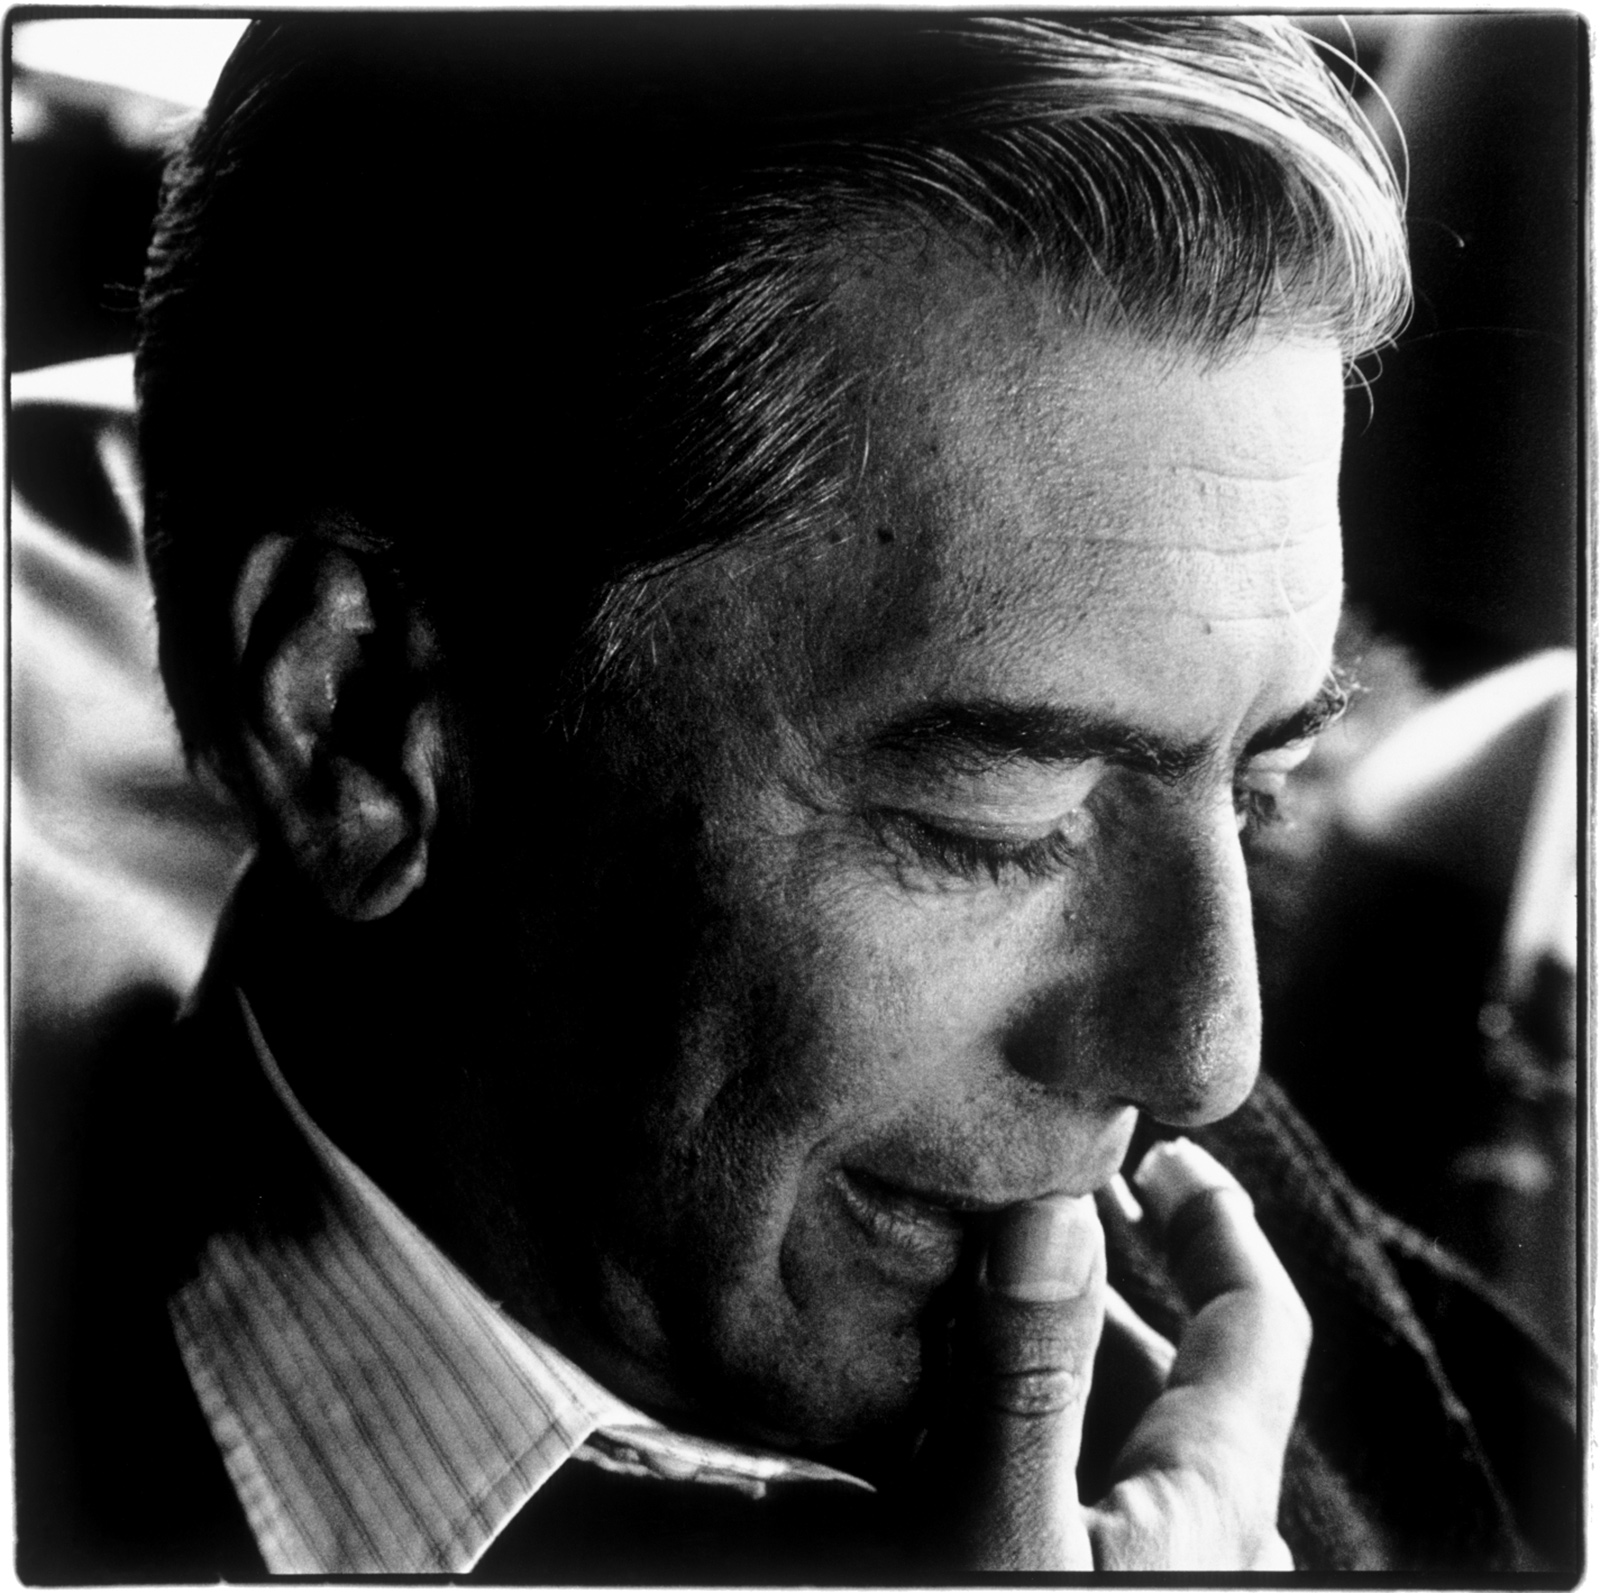 The Passions of Vargas Llosa